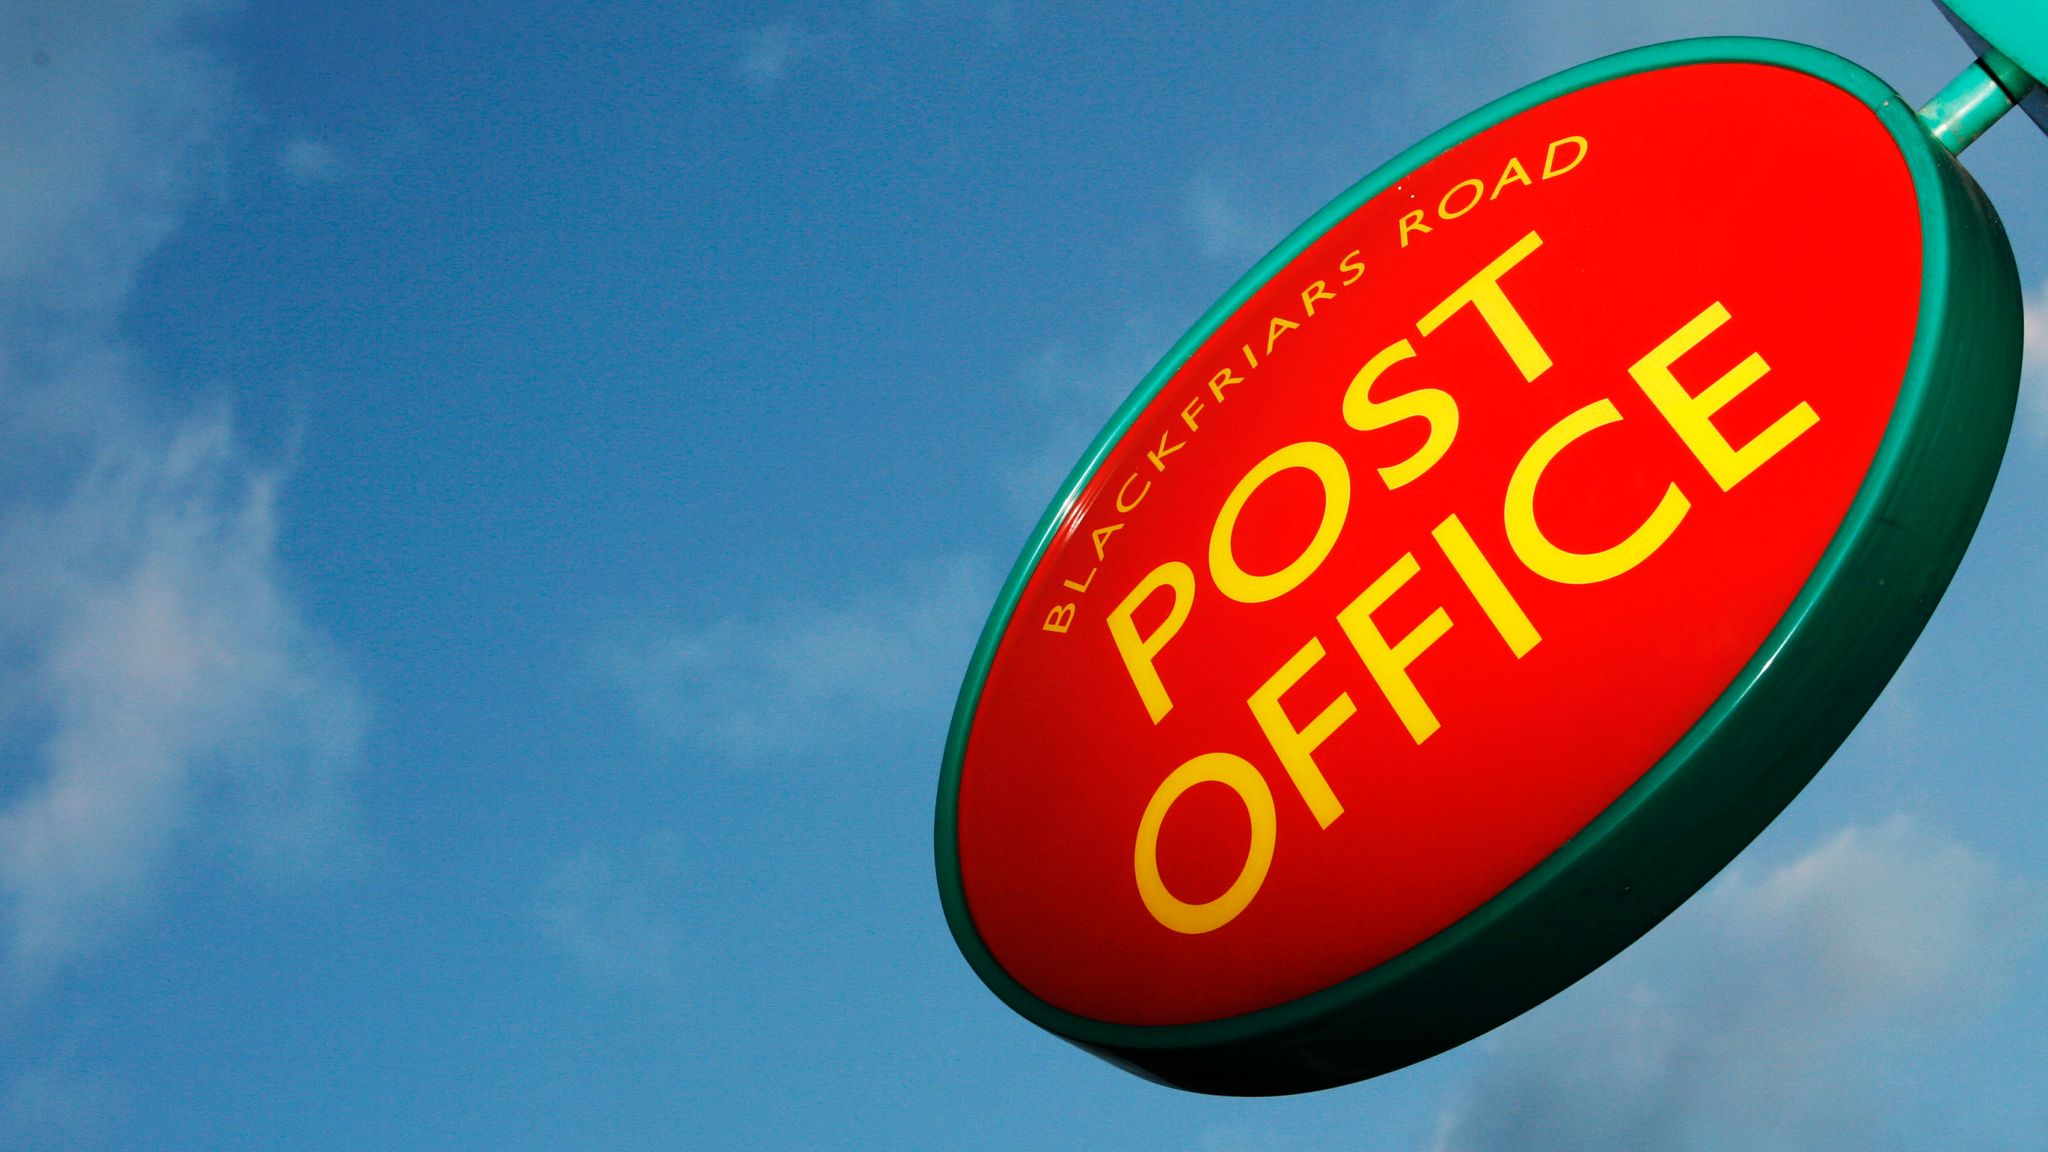 Government kicks off hunt for Post Office chairman amid IT scandal fallout  | Business News | Sky News